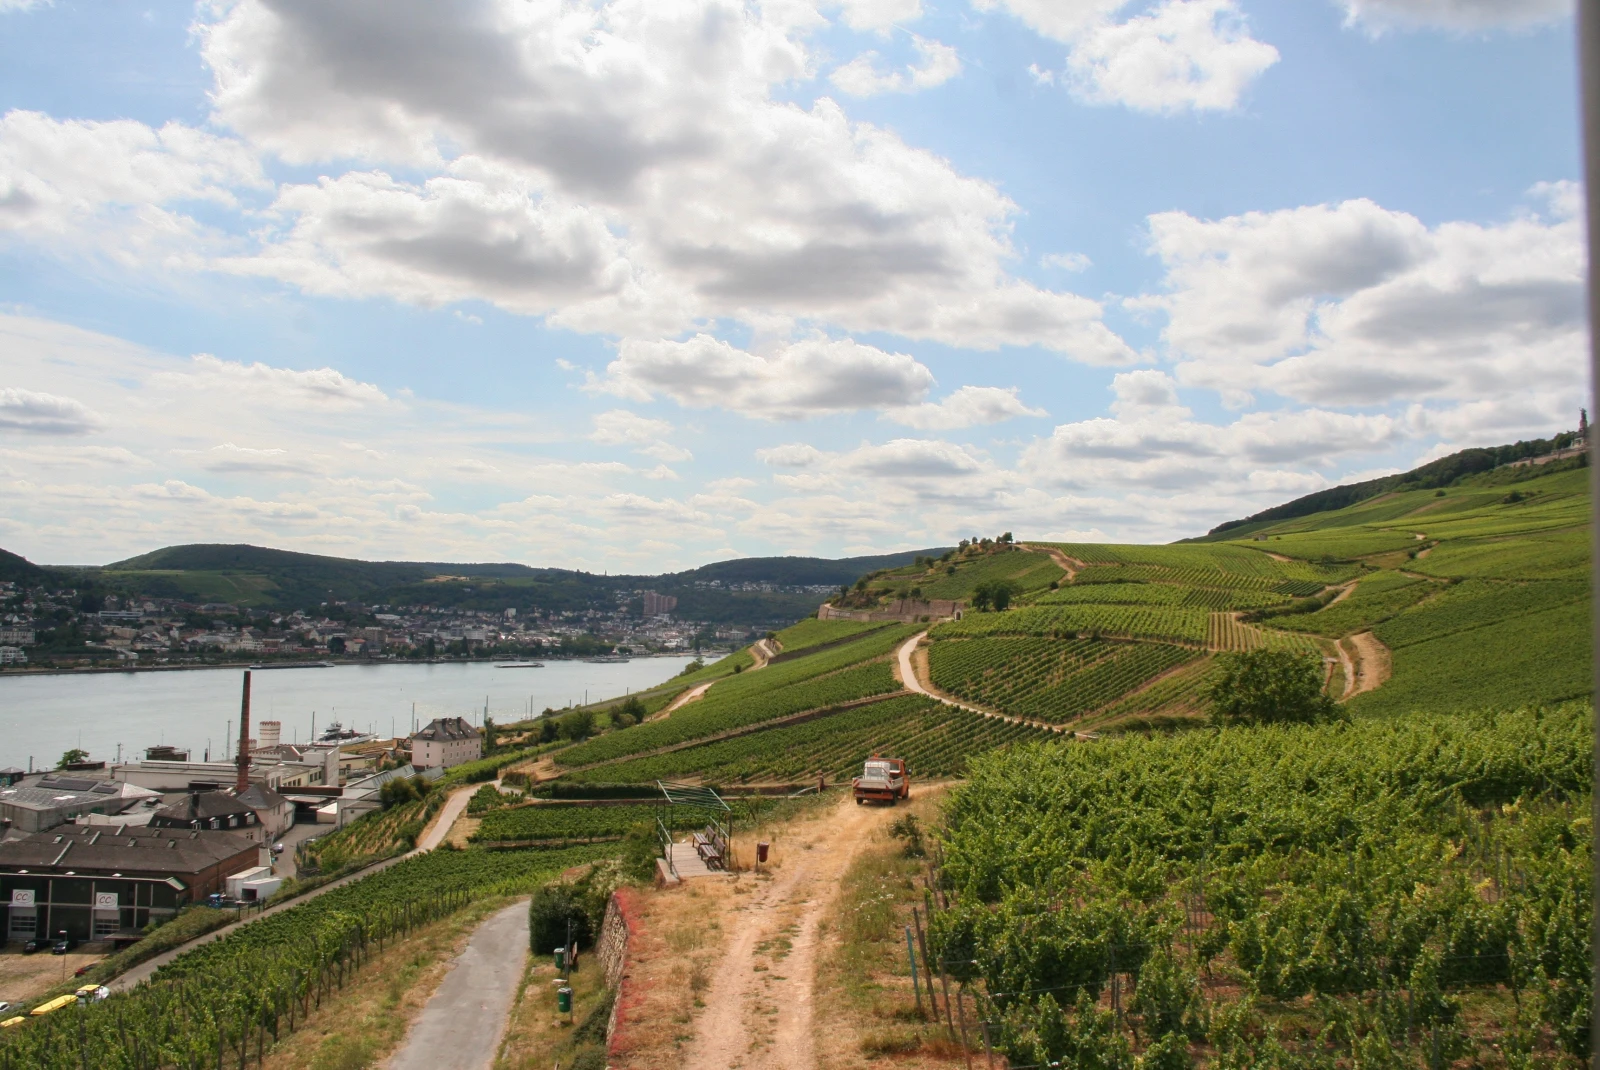 The city of Rudesheim with sprawling green hills and a river. 